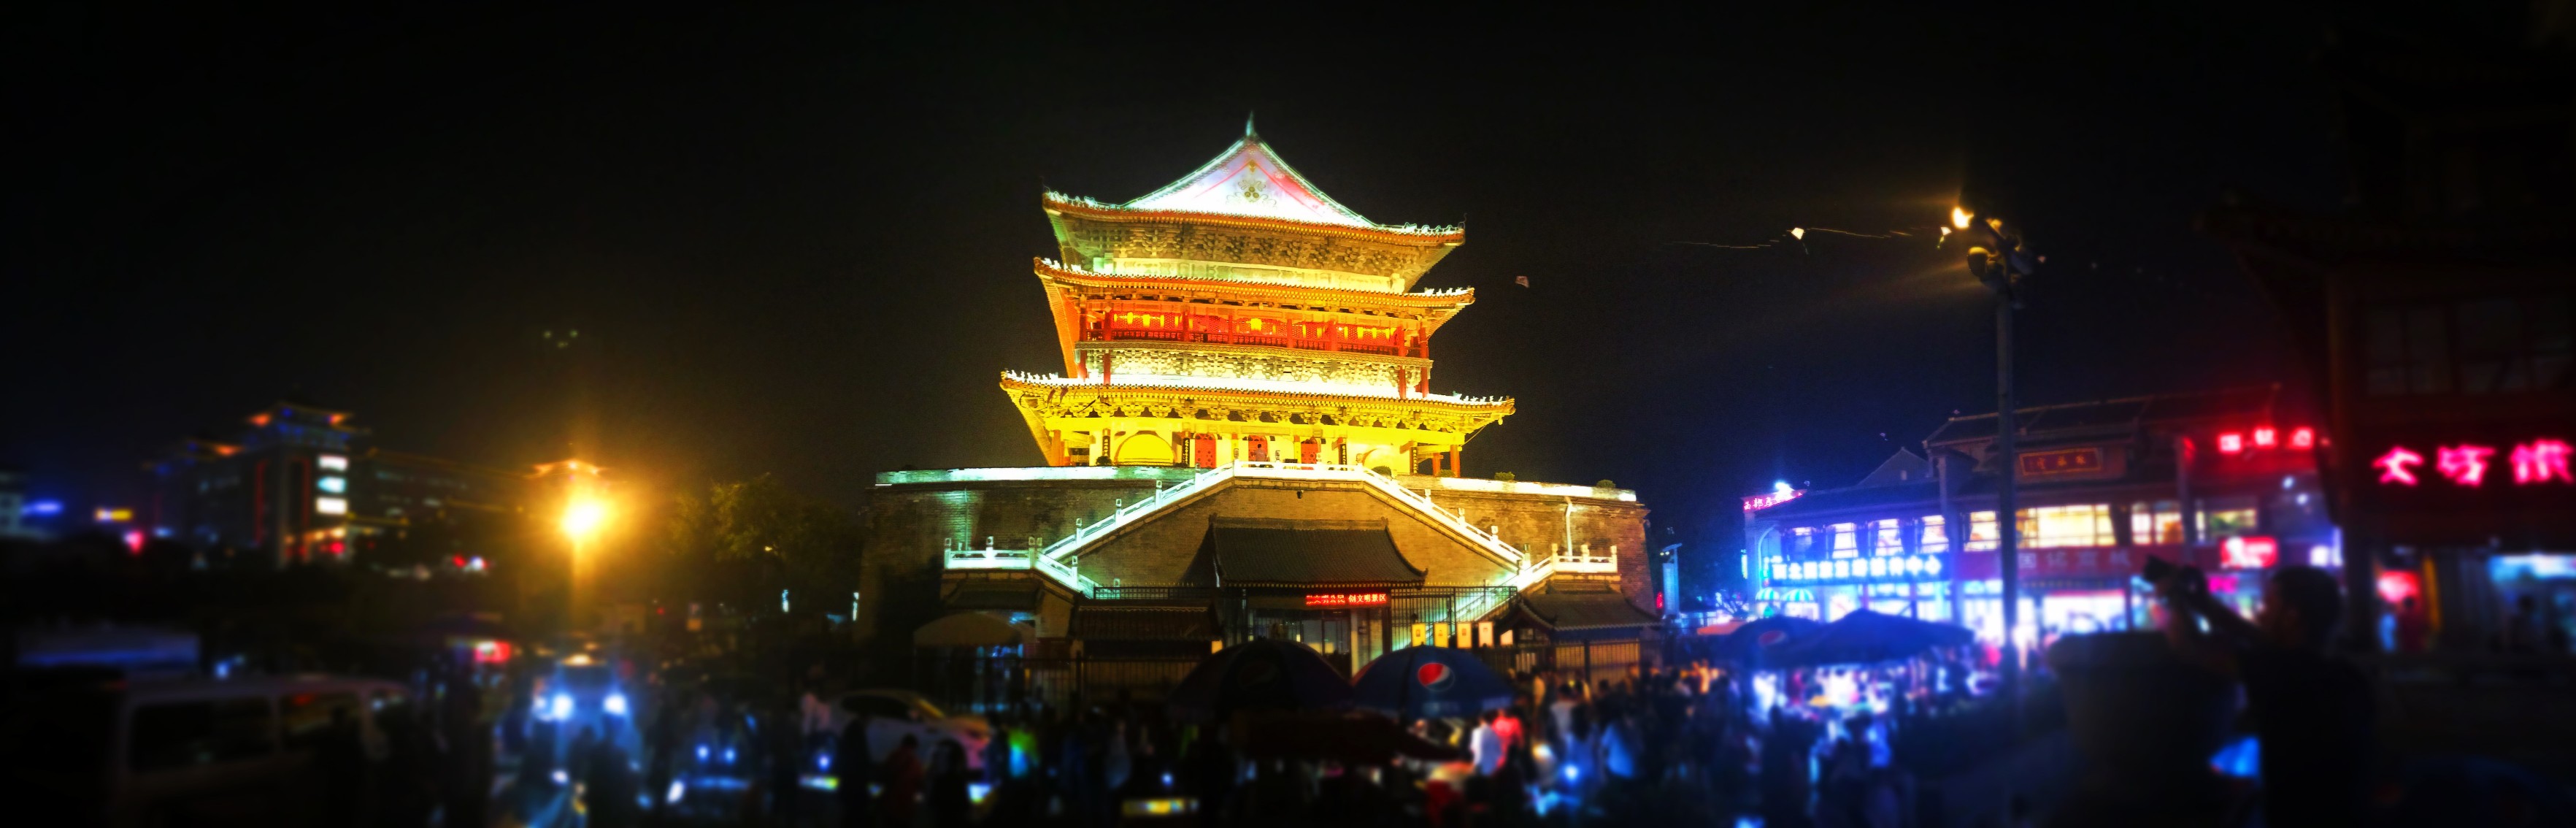 Xi’an City Guide: experiencing China’s history, nature and culture